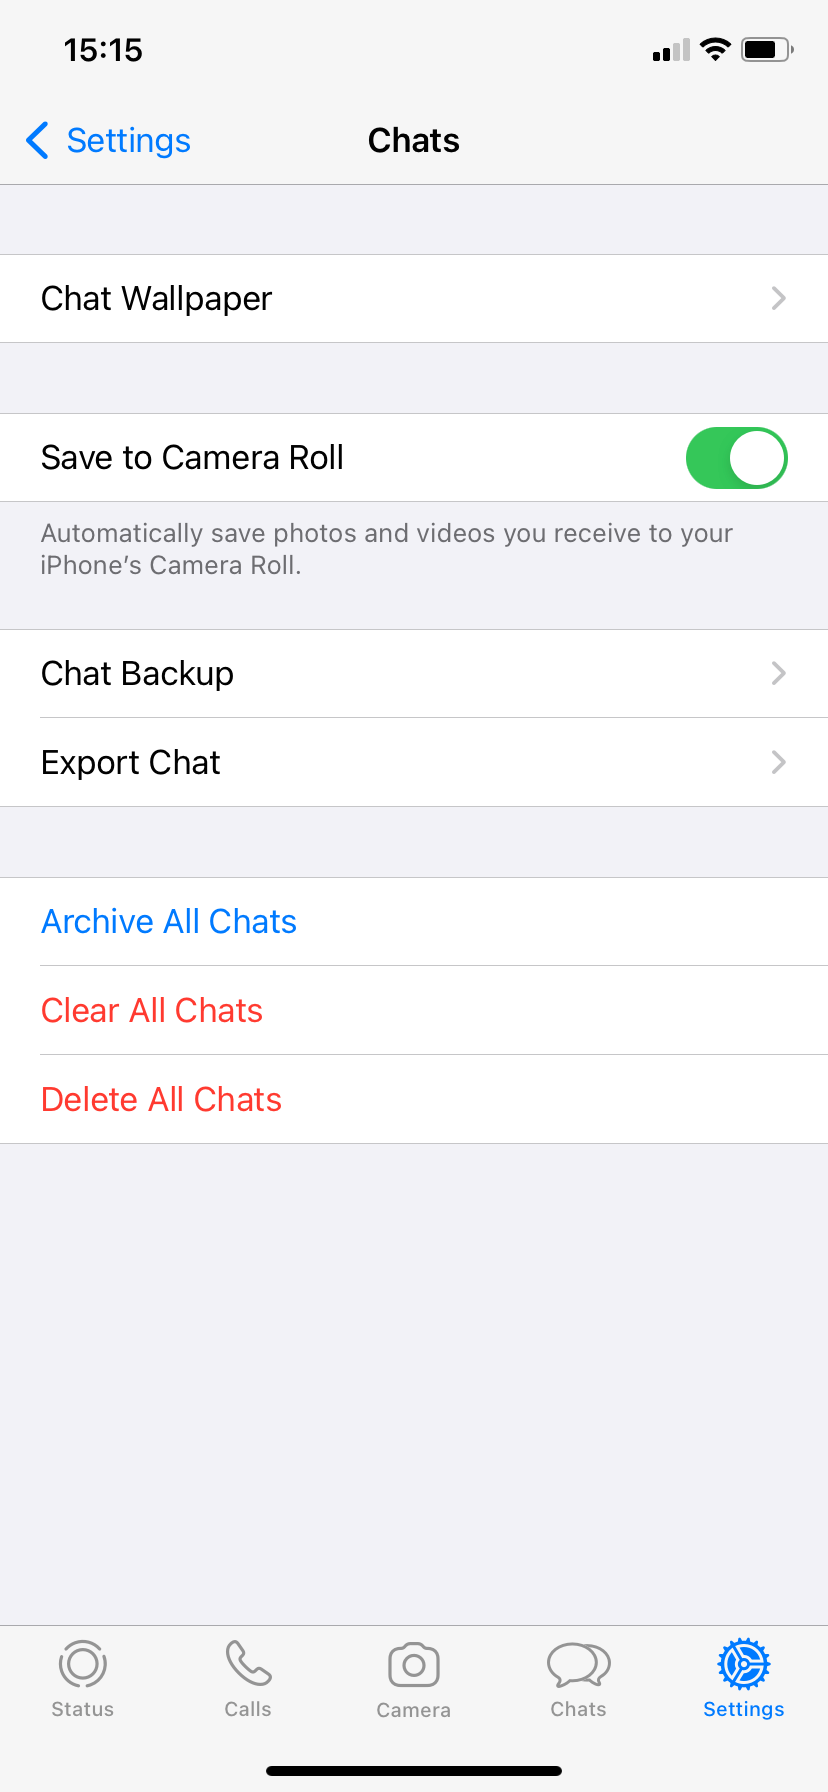 Save to Camera Roll enabled on WhatsApp for iOS